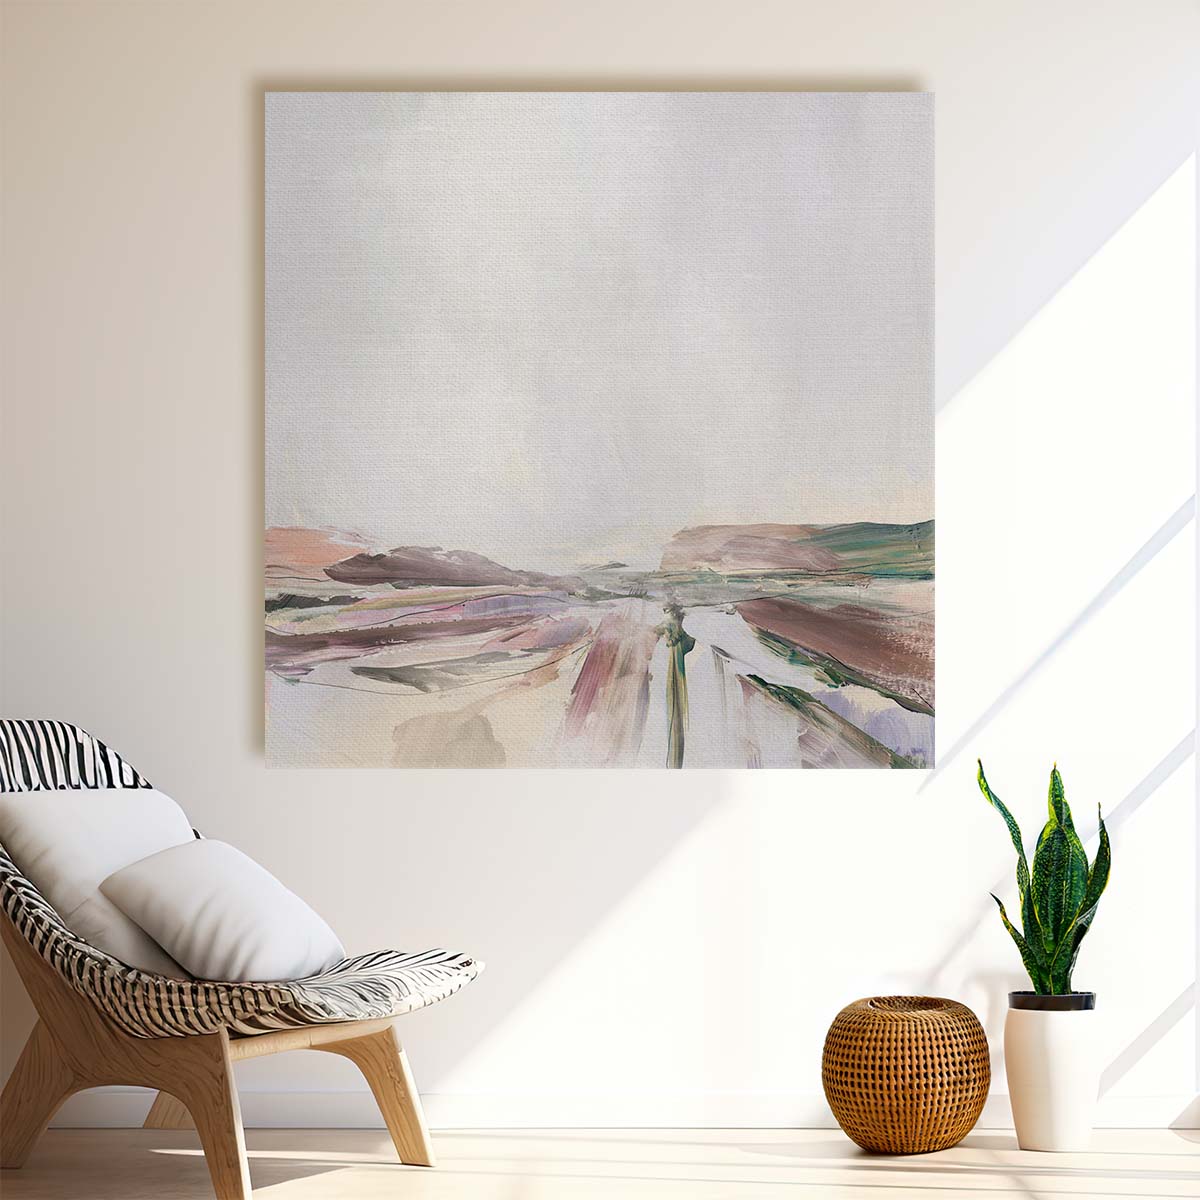 Dan Hobday Contemporary Minimalist Abstract Landscape Illustration Wall Art by Luxuriance Designs. Made in USA.